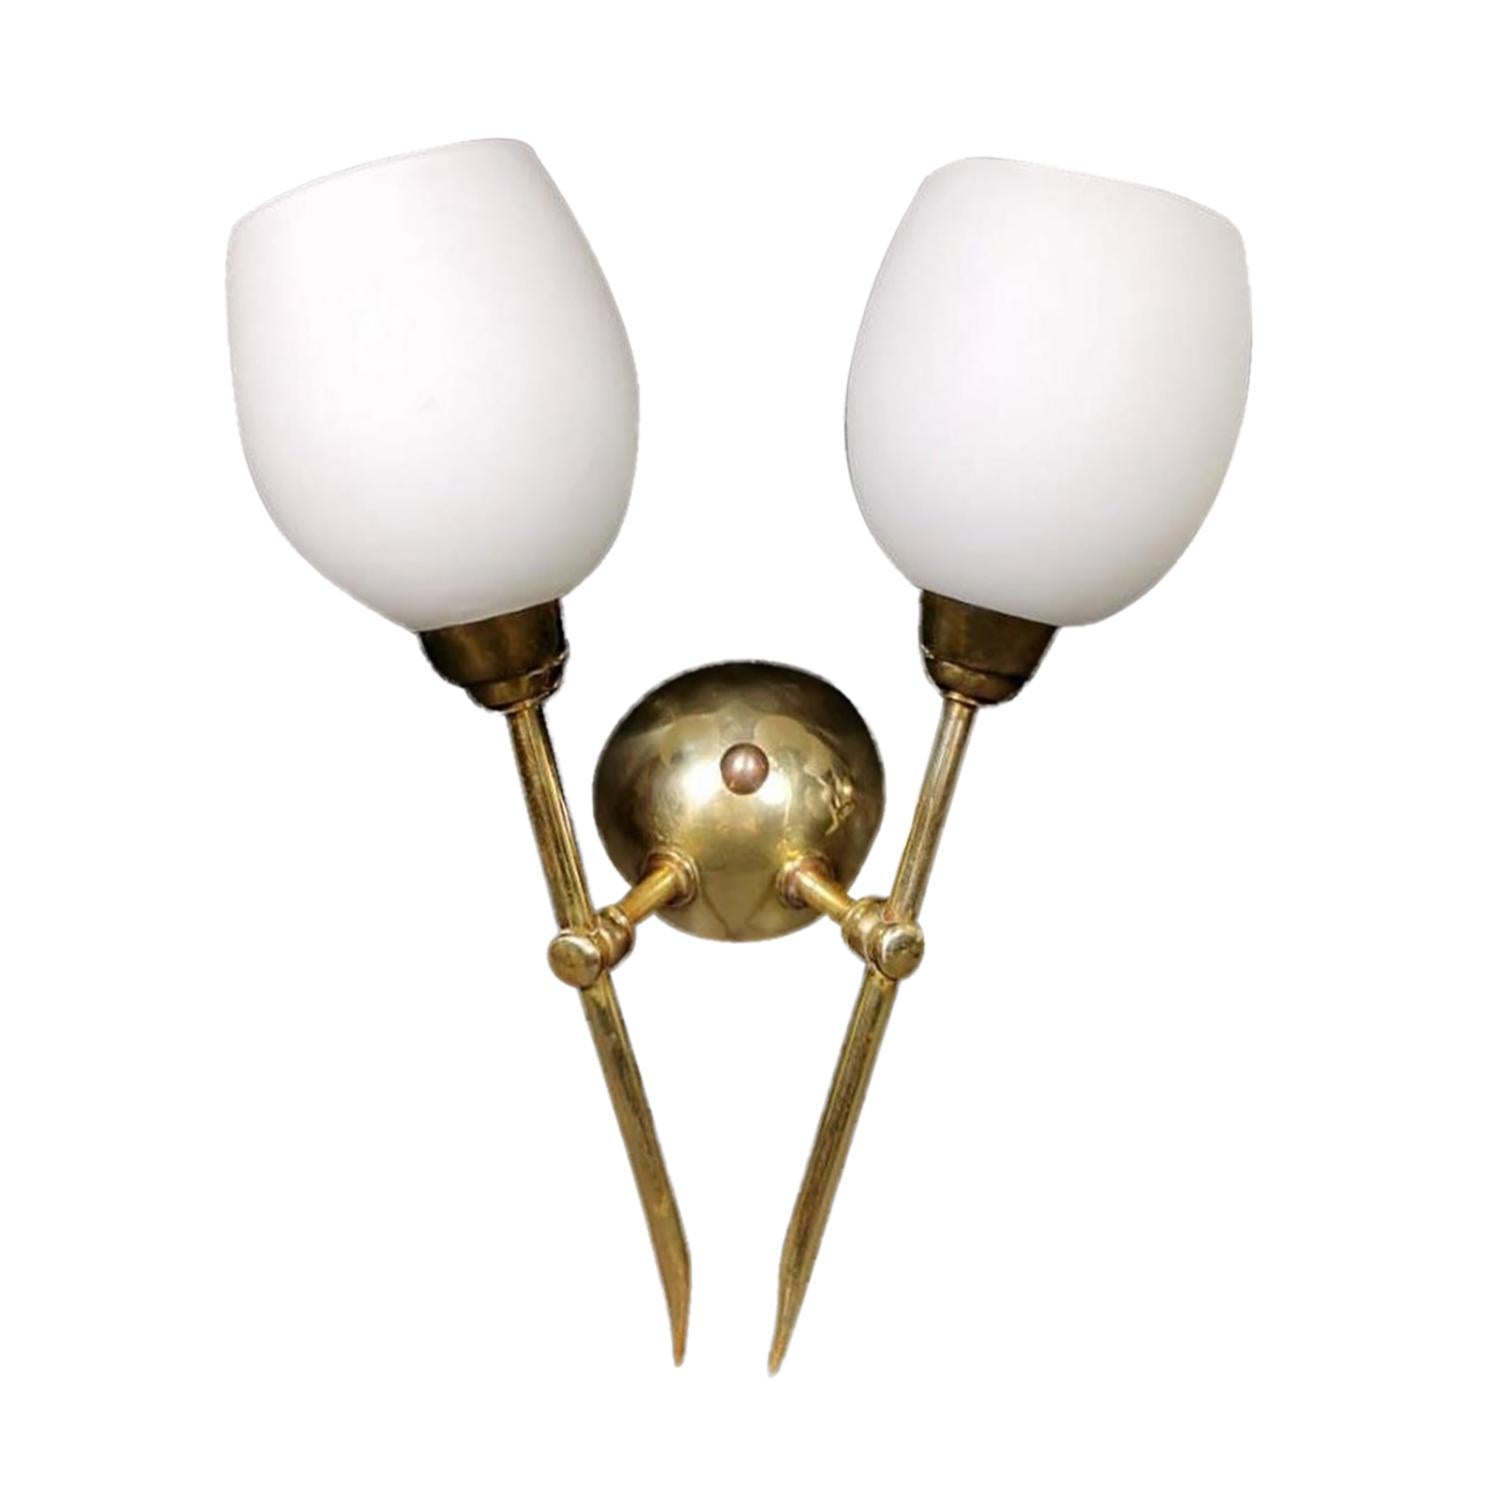 A small, vintage Mid-Century Modern Italian pair of wall sconces, appliques made of hand crafted polished brass and opaline glass, in good condition. The four white milk glass shades are imitating a tulip, each is featuring a one light socket. The